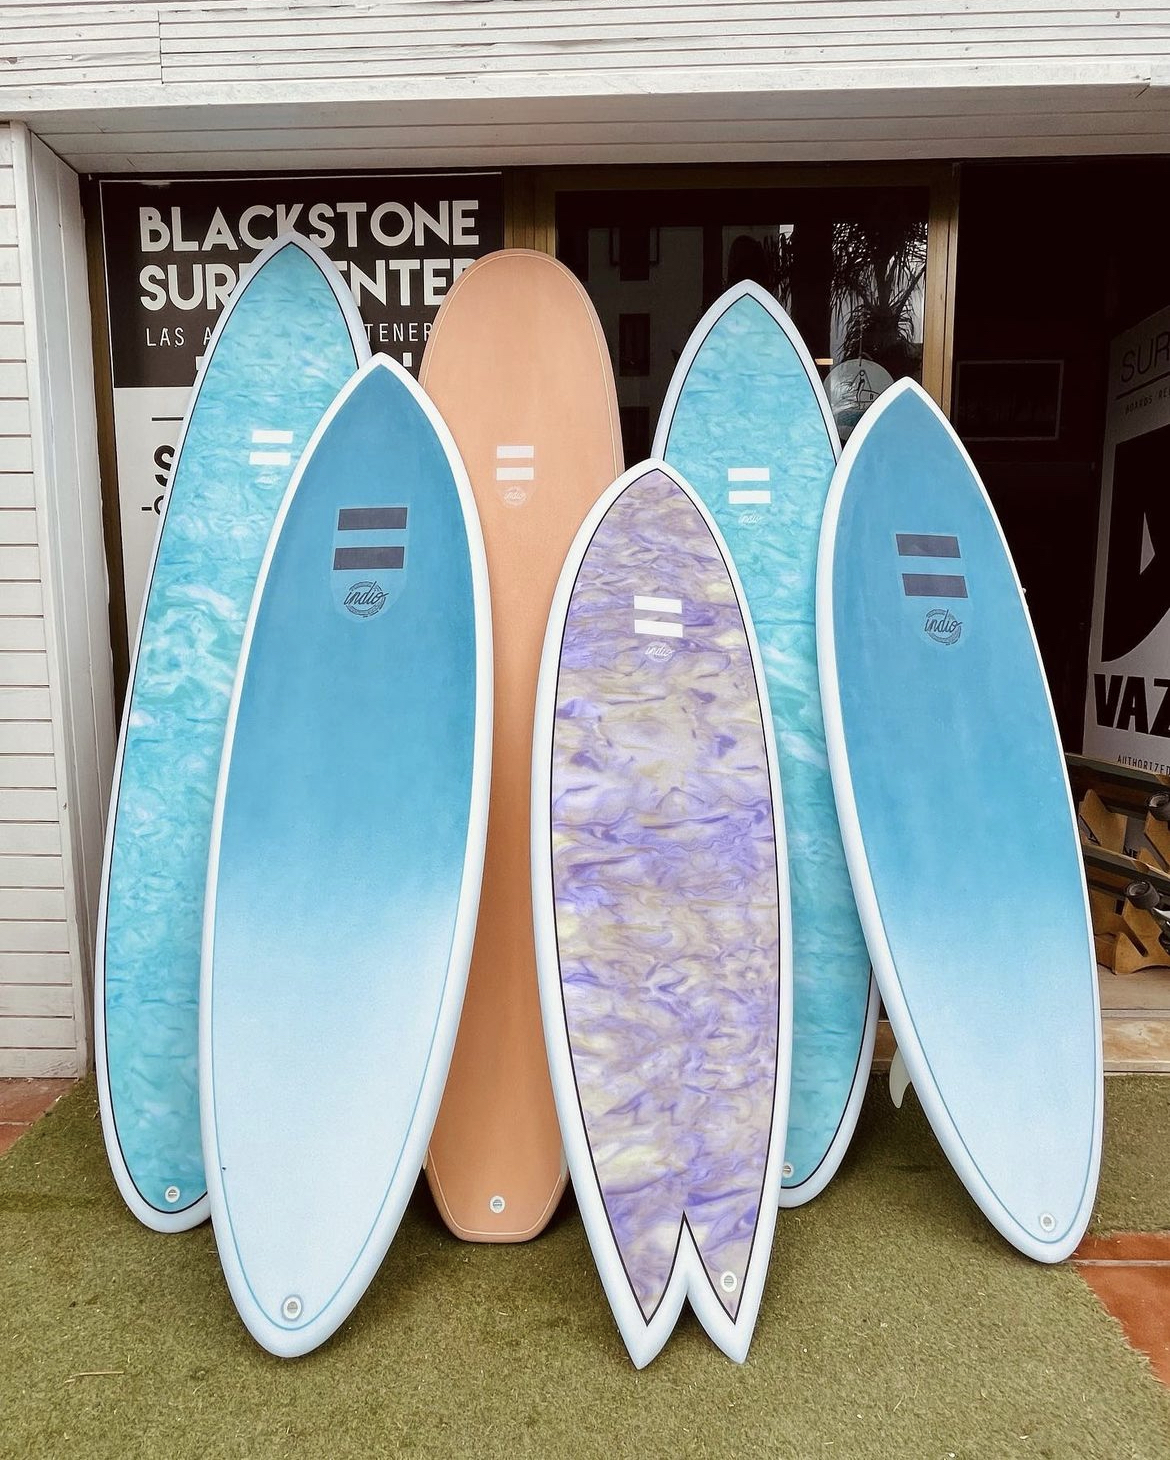 Indio Surf Boards available for Rental in Tenerife in Blackstone Surf Center Playa las Américas from 17€ per day